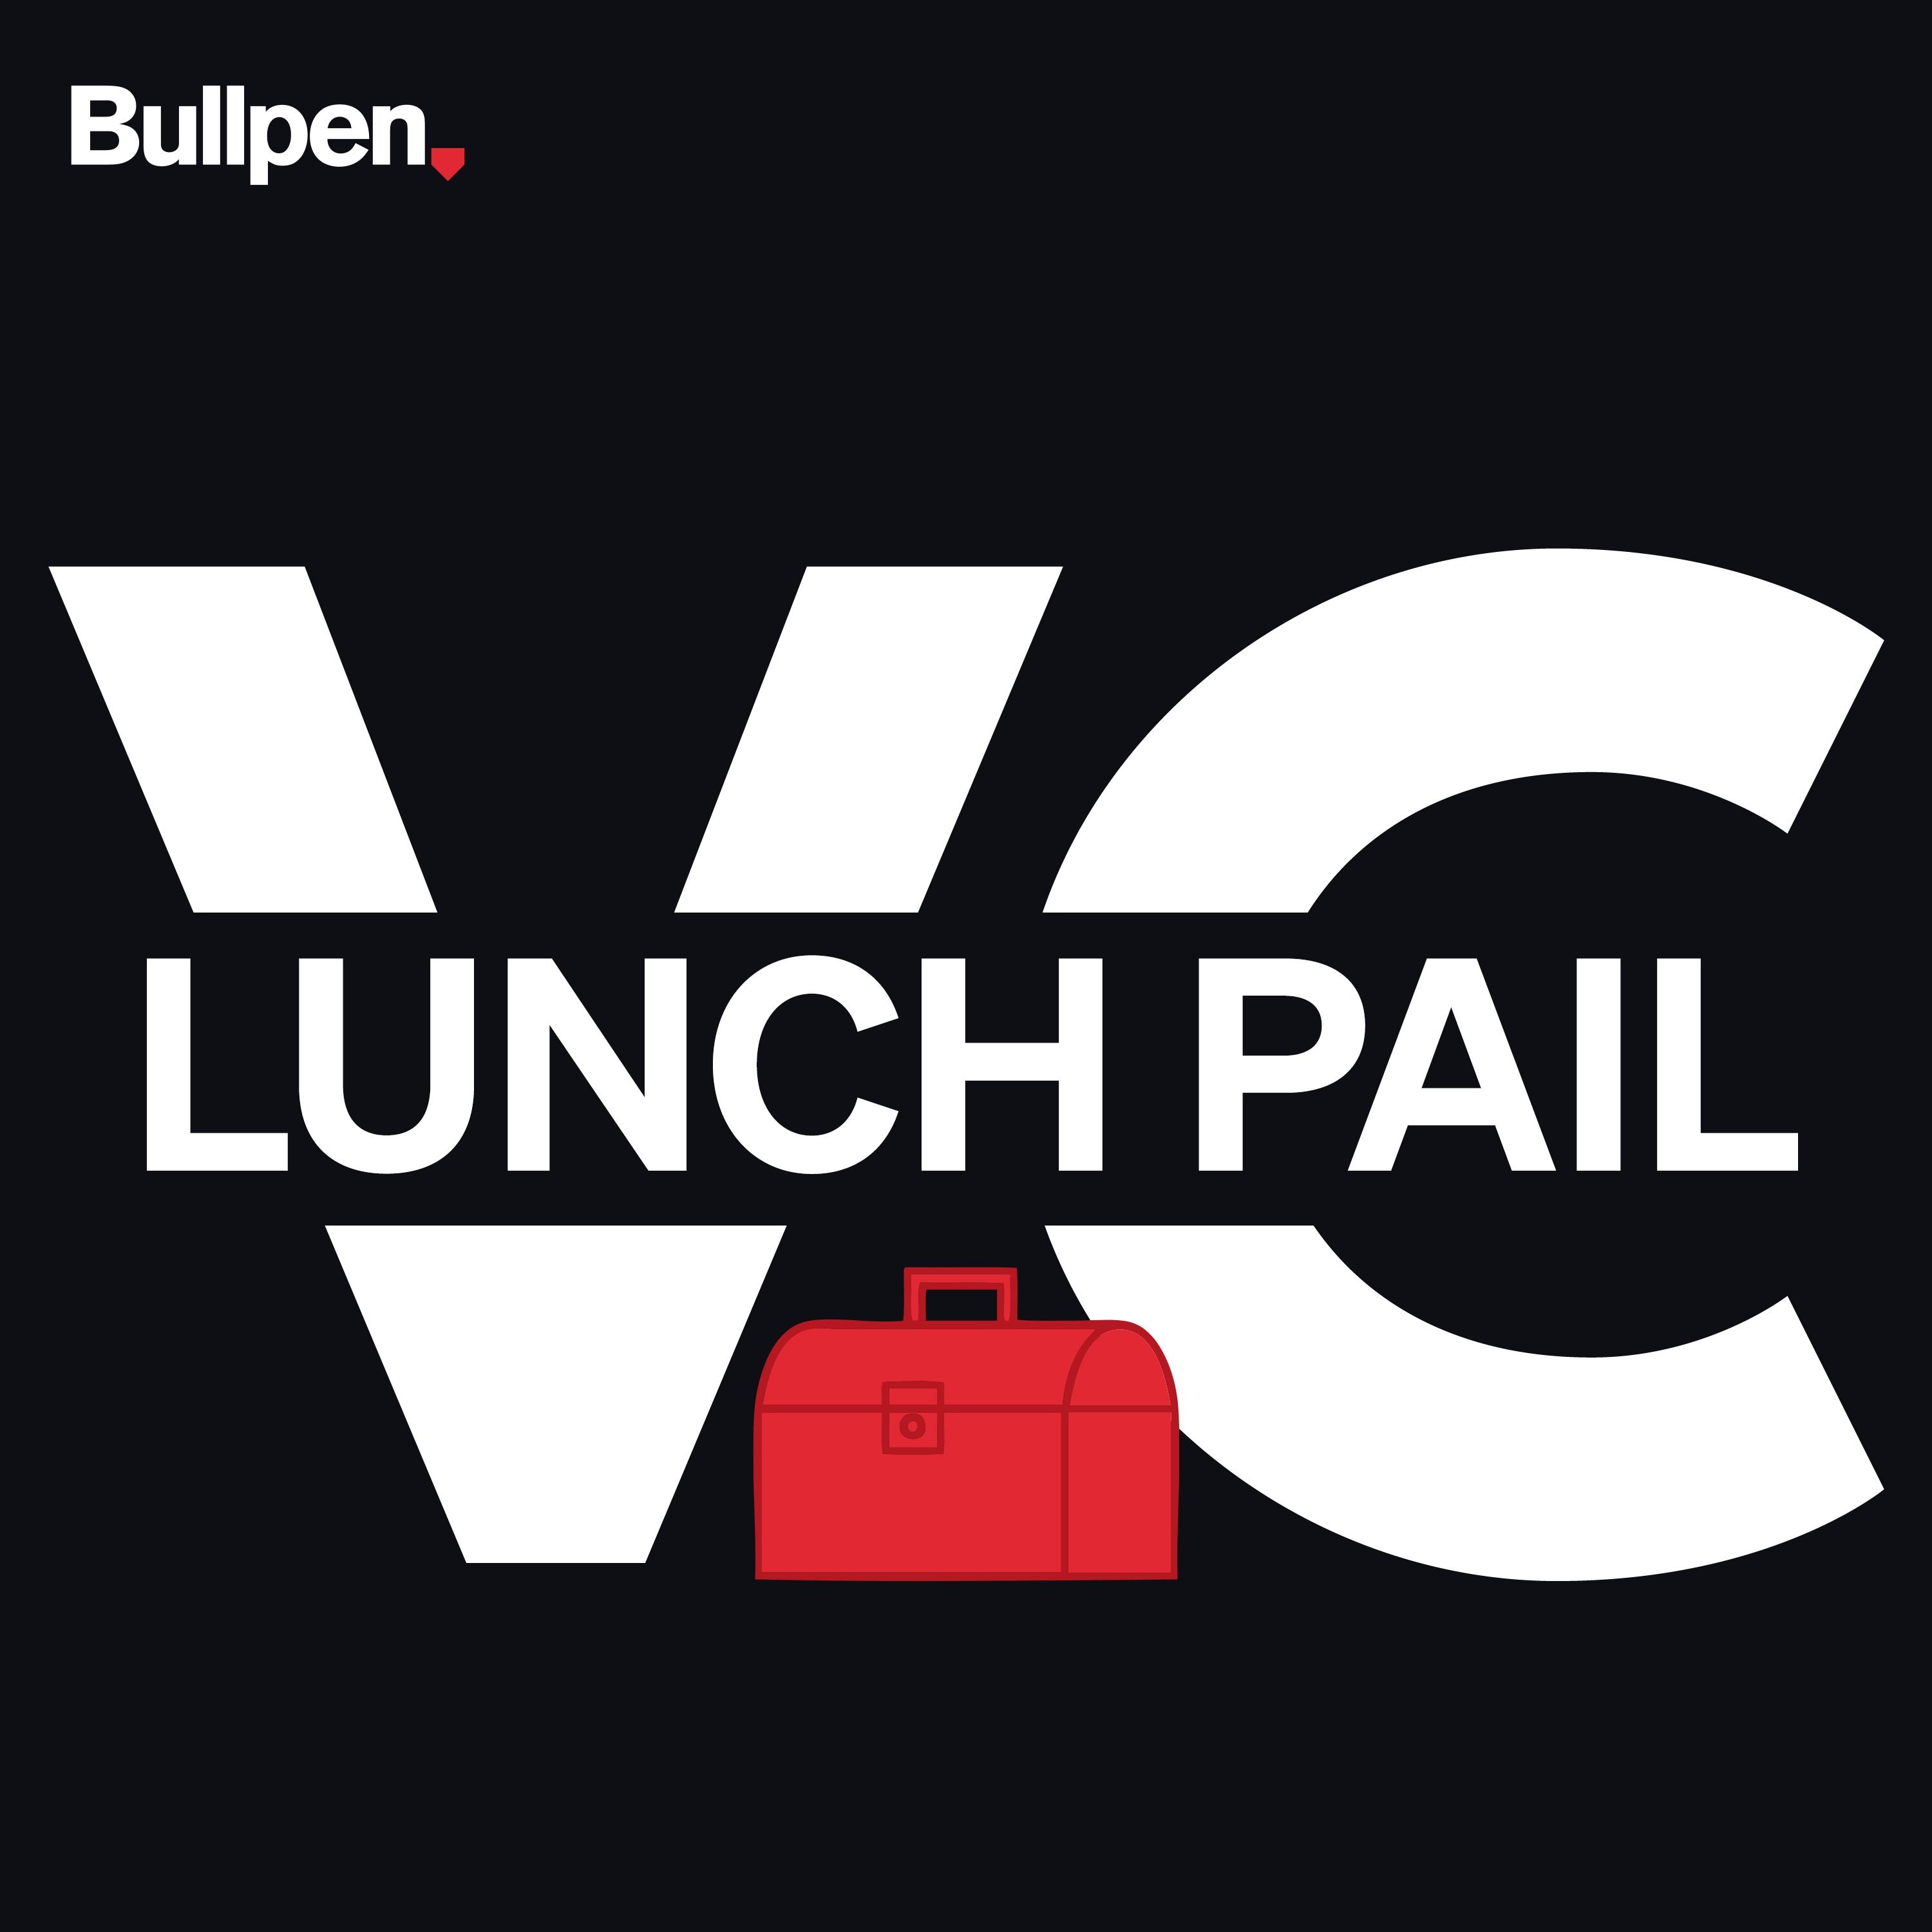 Lunch Pail VC Intro